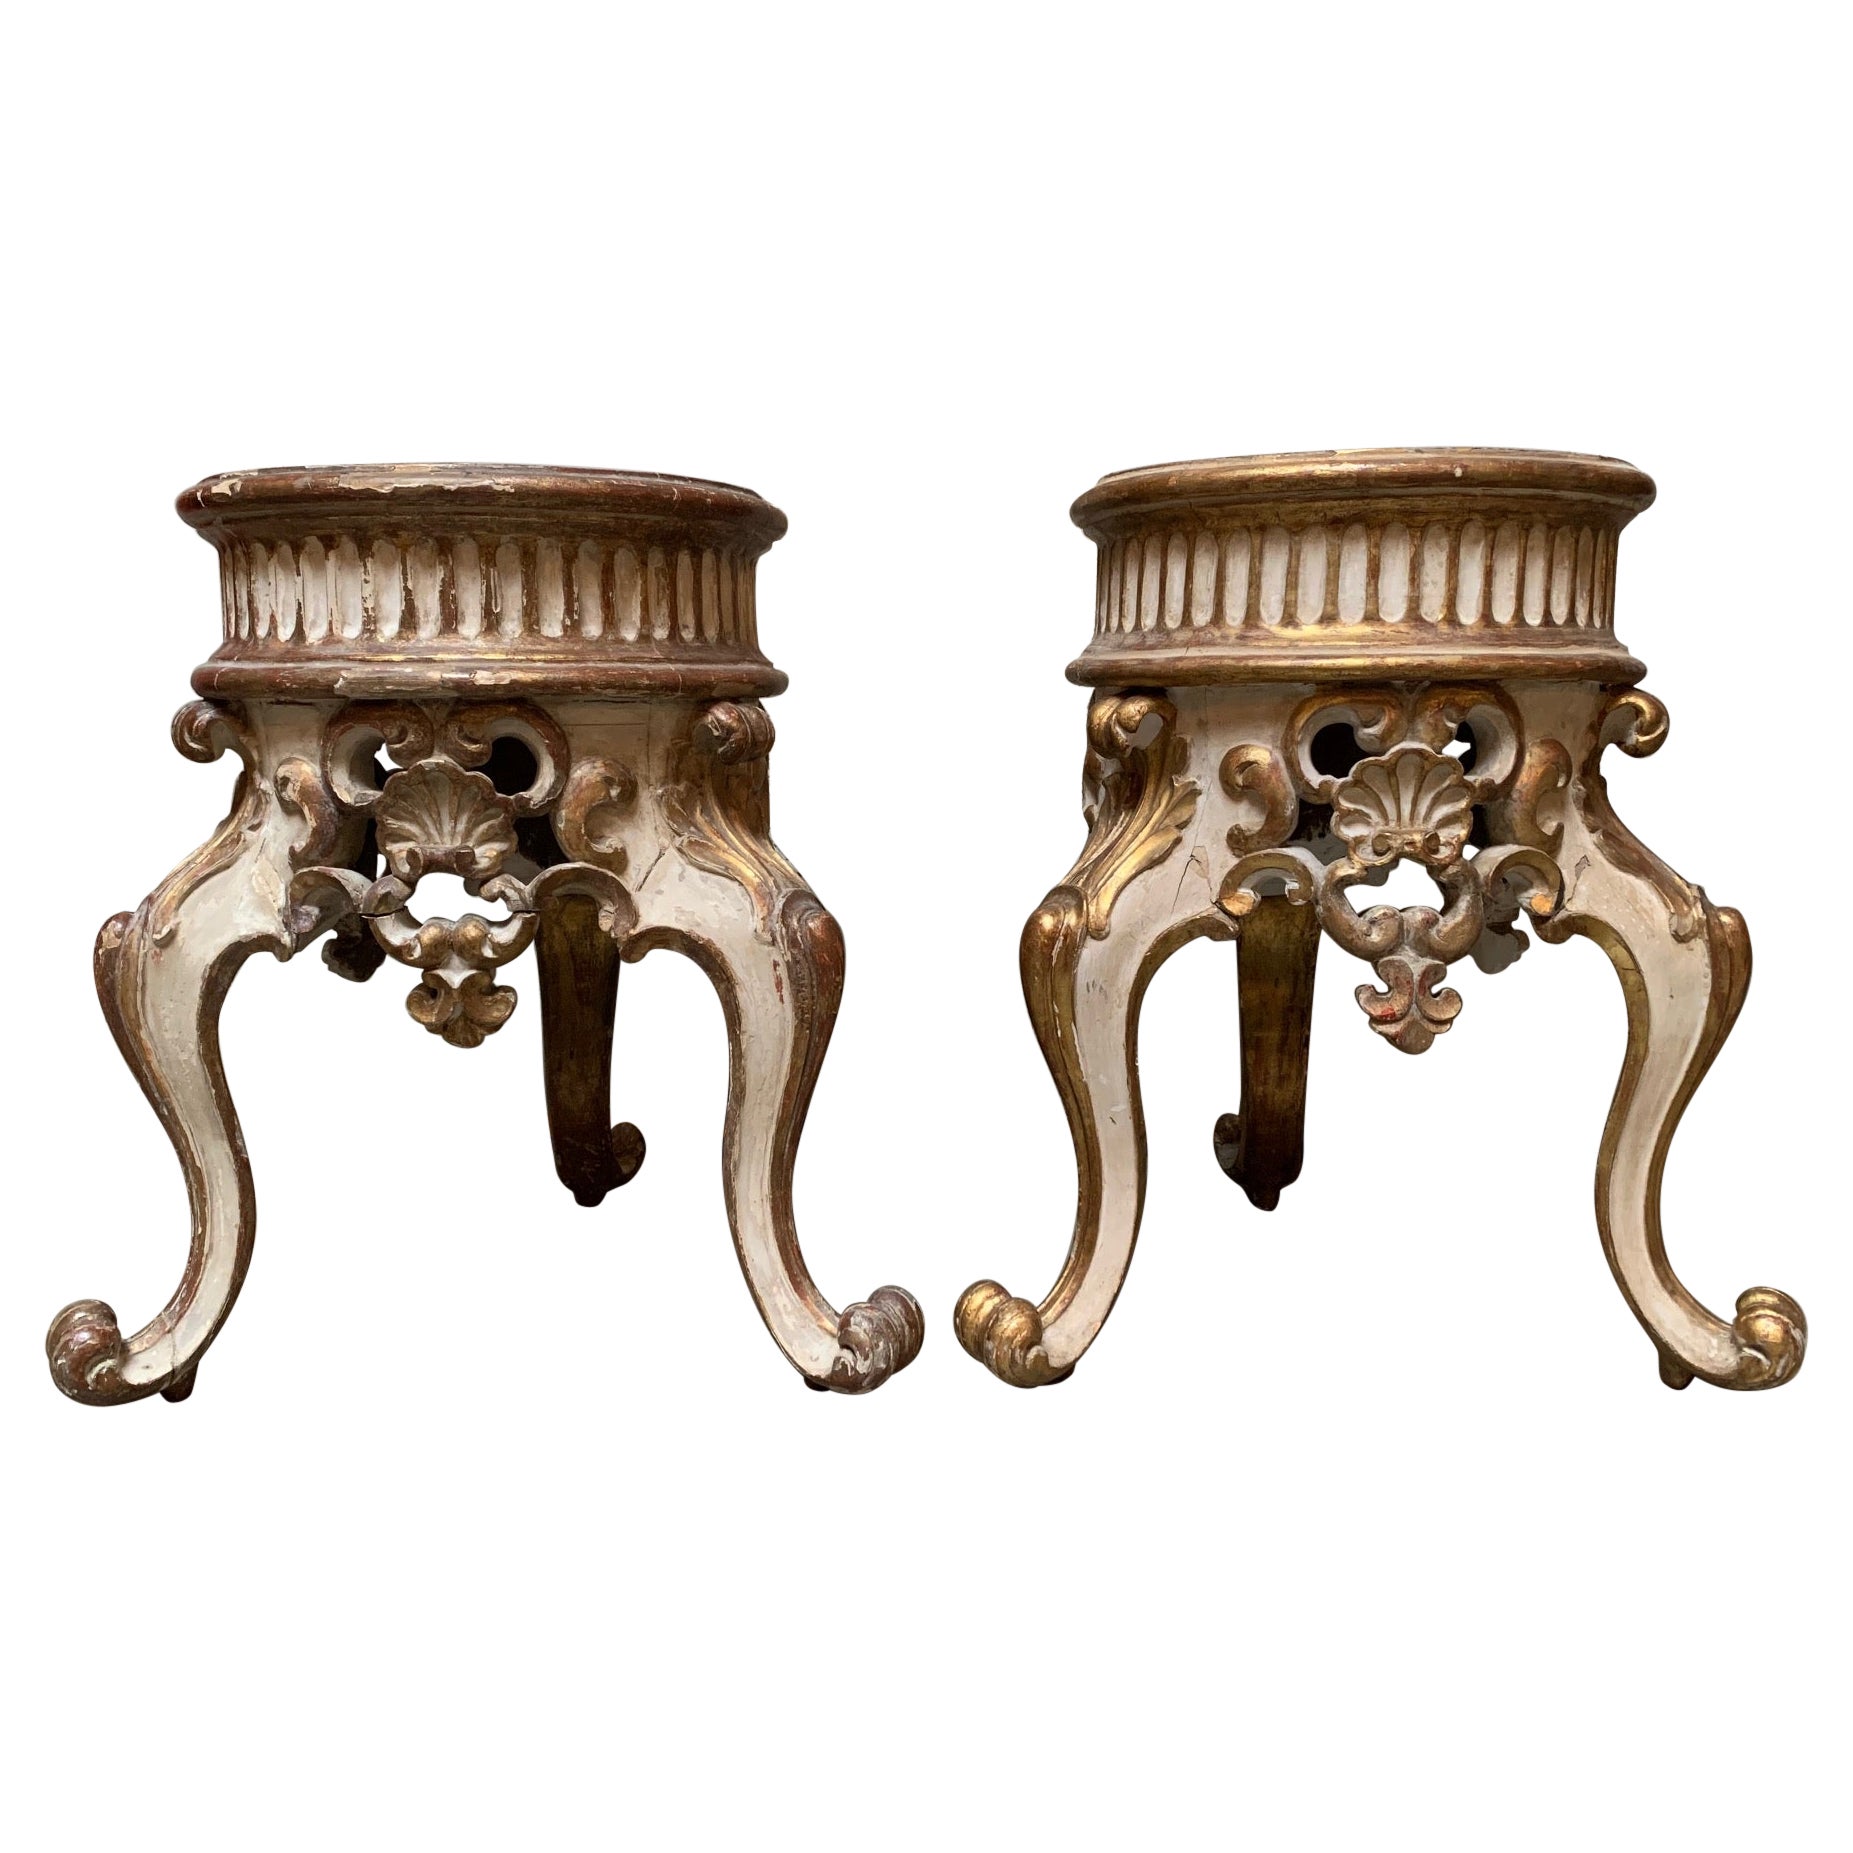 Pair of 19th Century Italian Parcel Gilt and Painted Jardiniere Stands